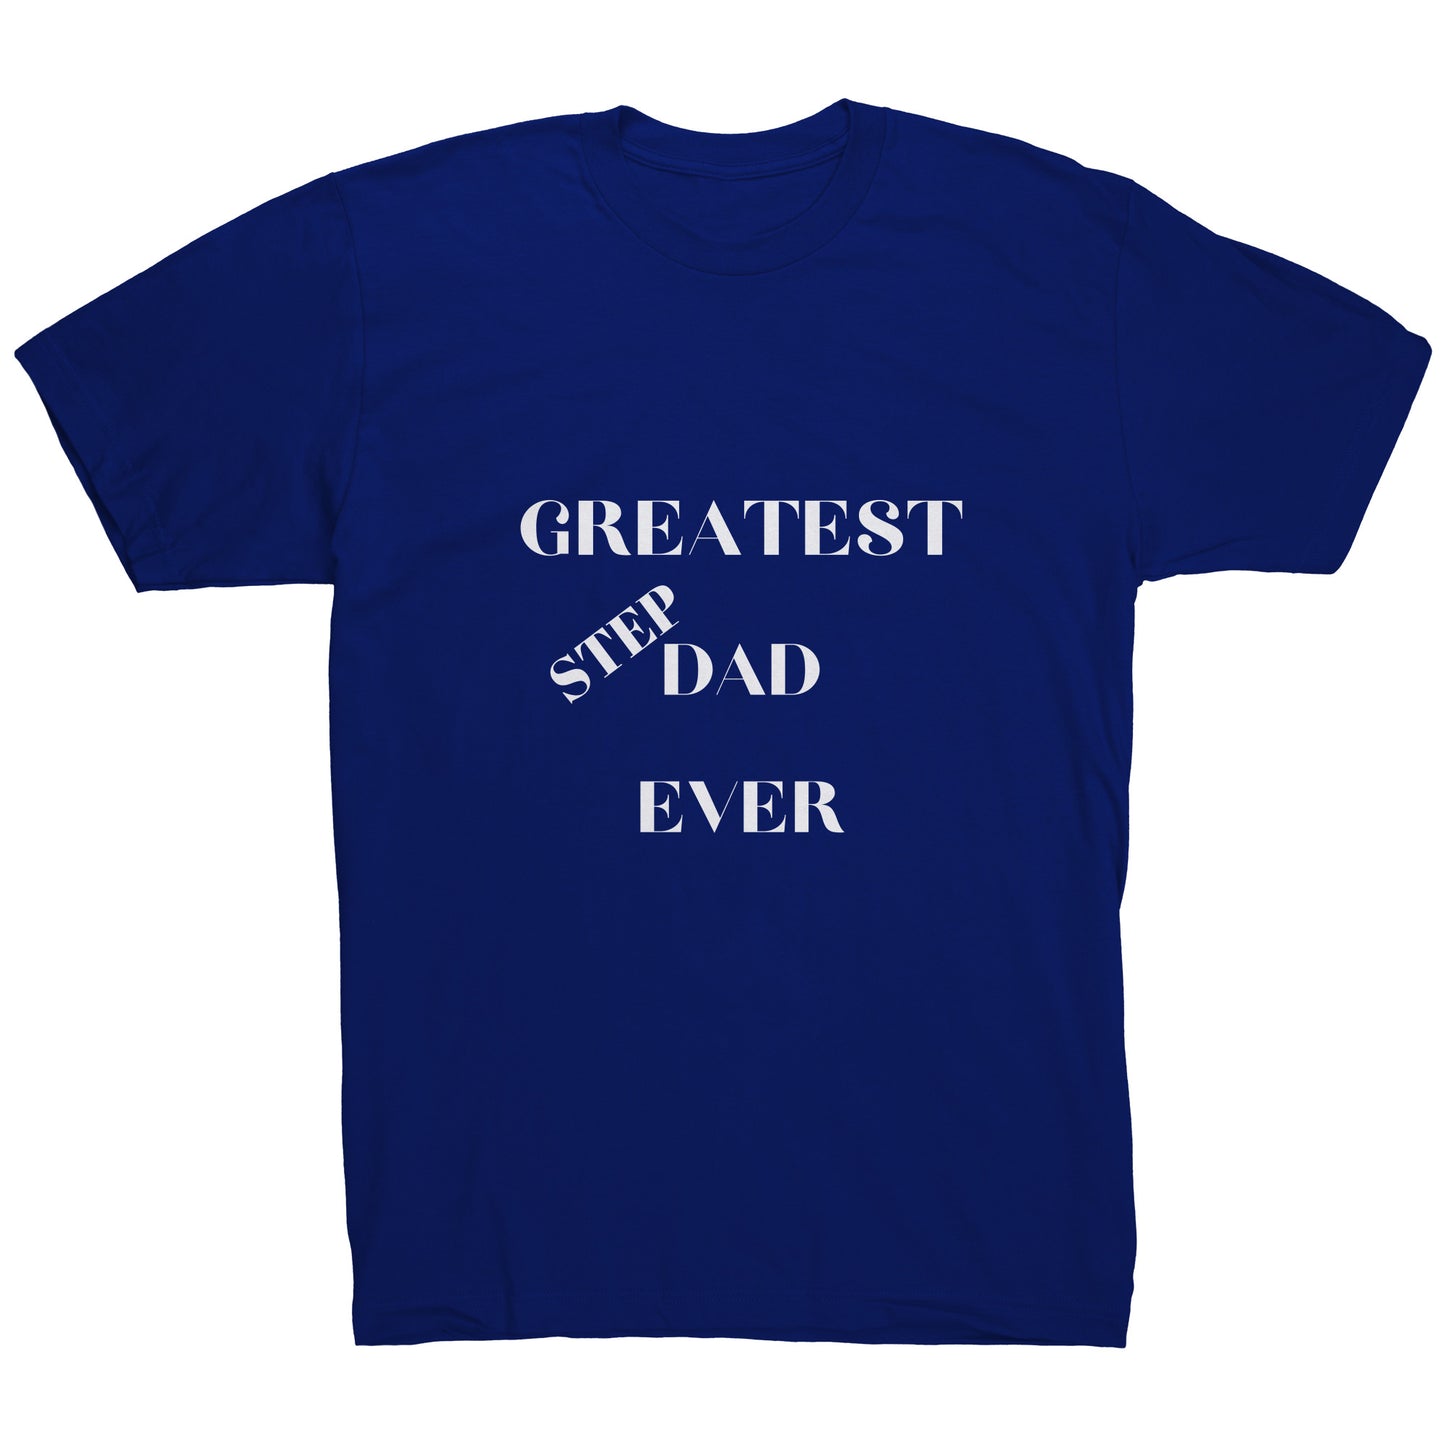 Father's Day "Greatest Step-Dad Ever' Shirt available in a variety of colors